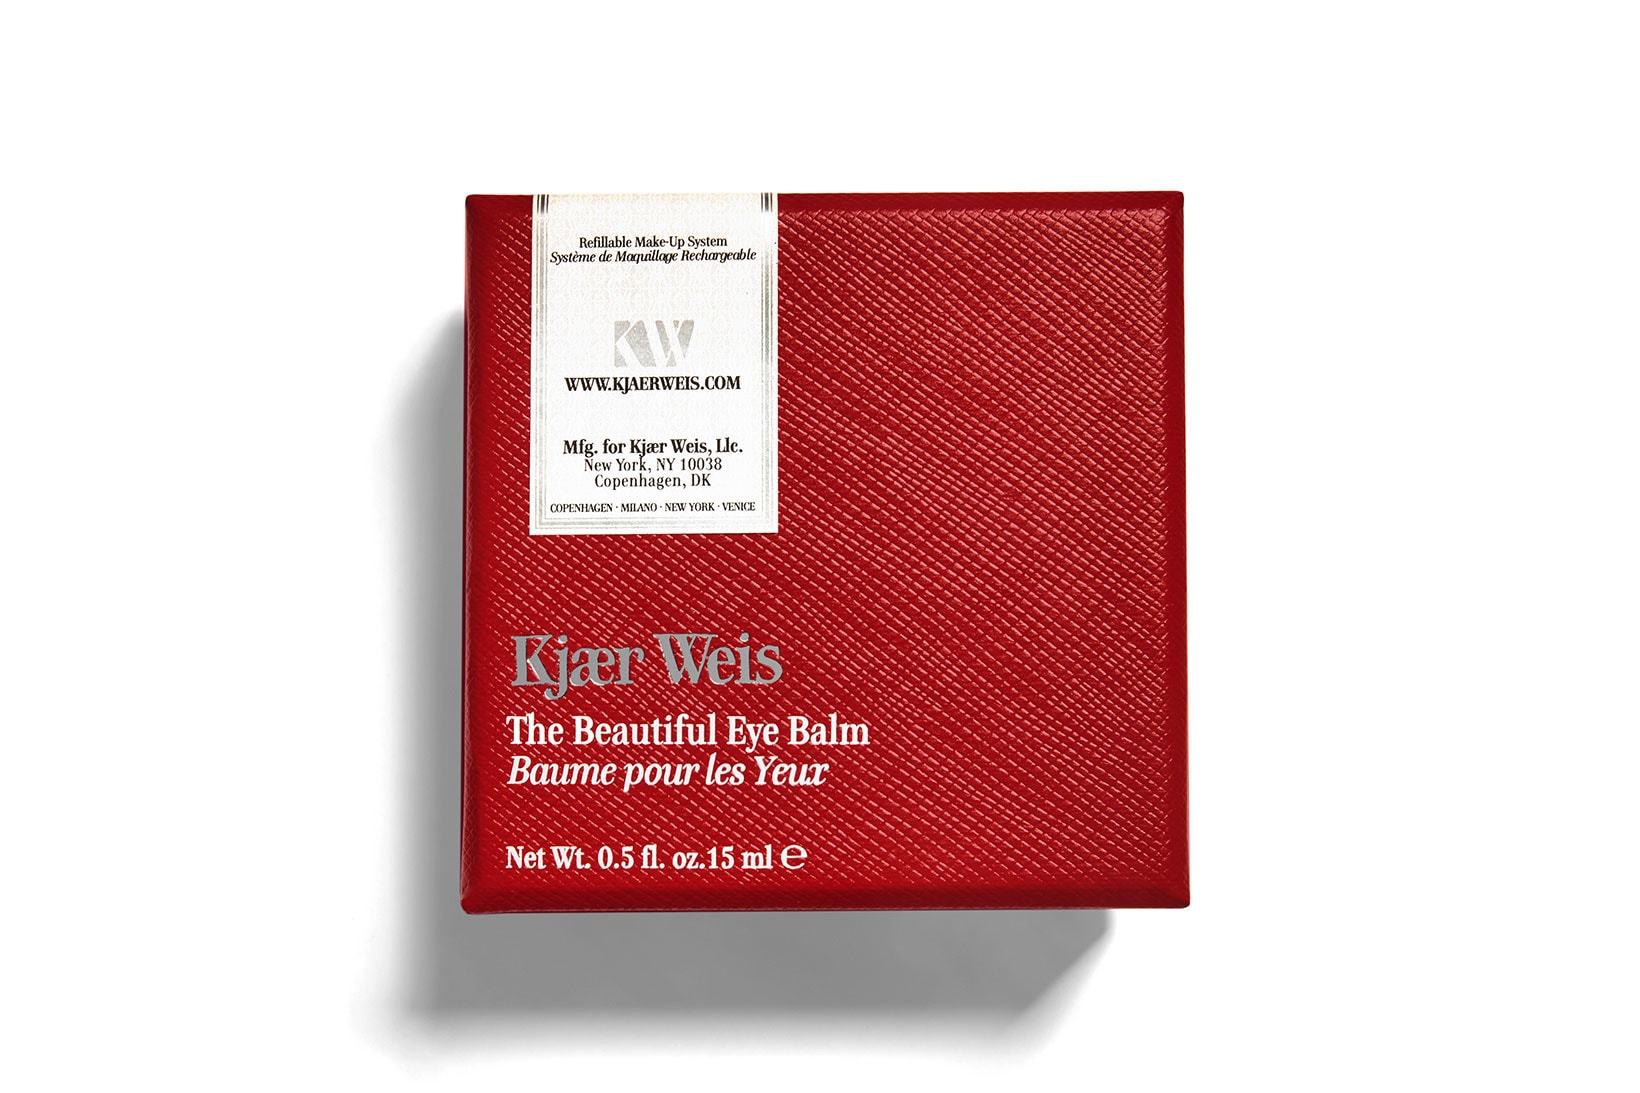 kjaer weis the beautiful eye balm skincare primer clean beauty sustainable